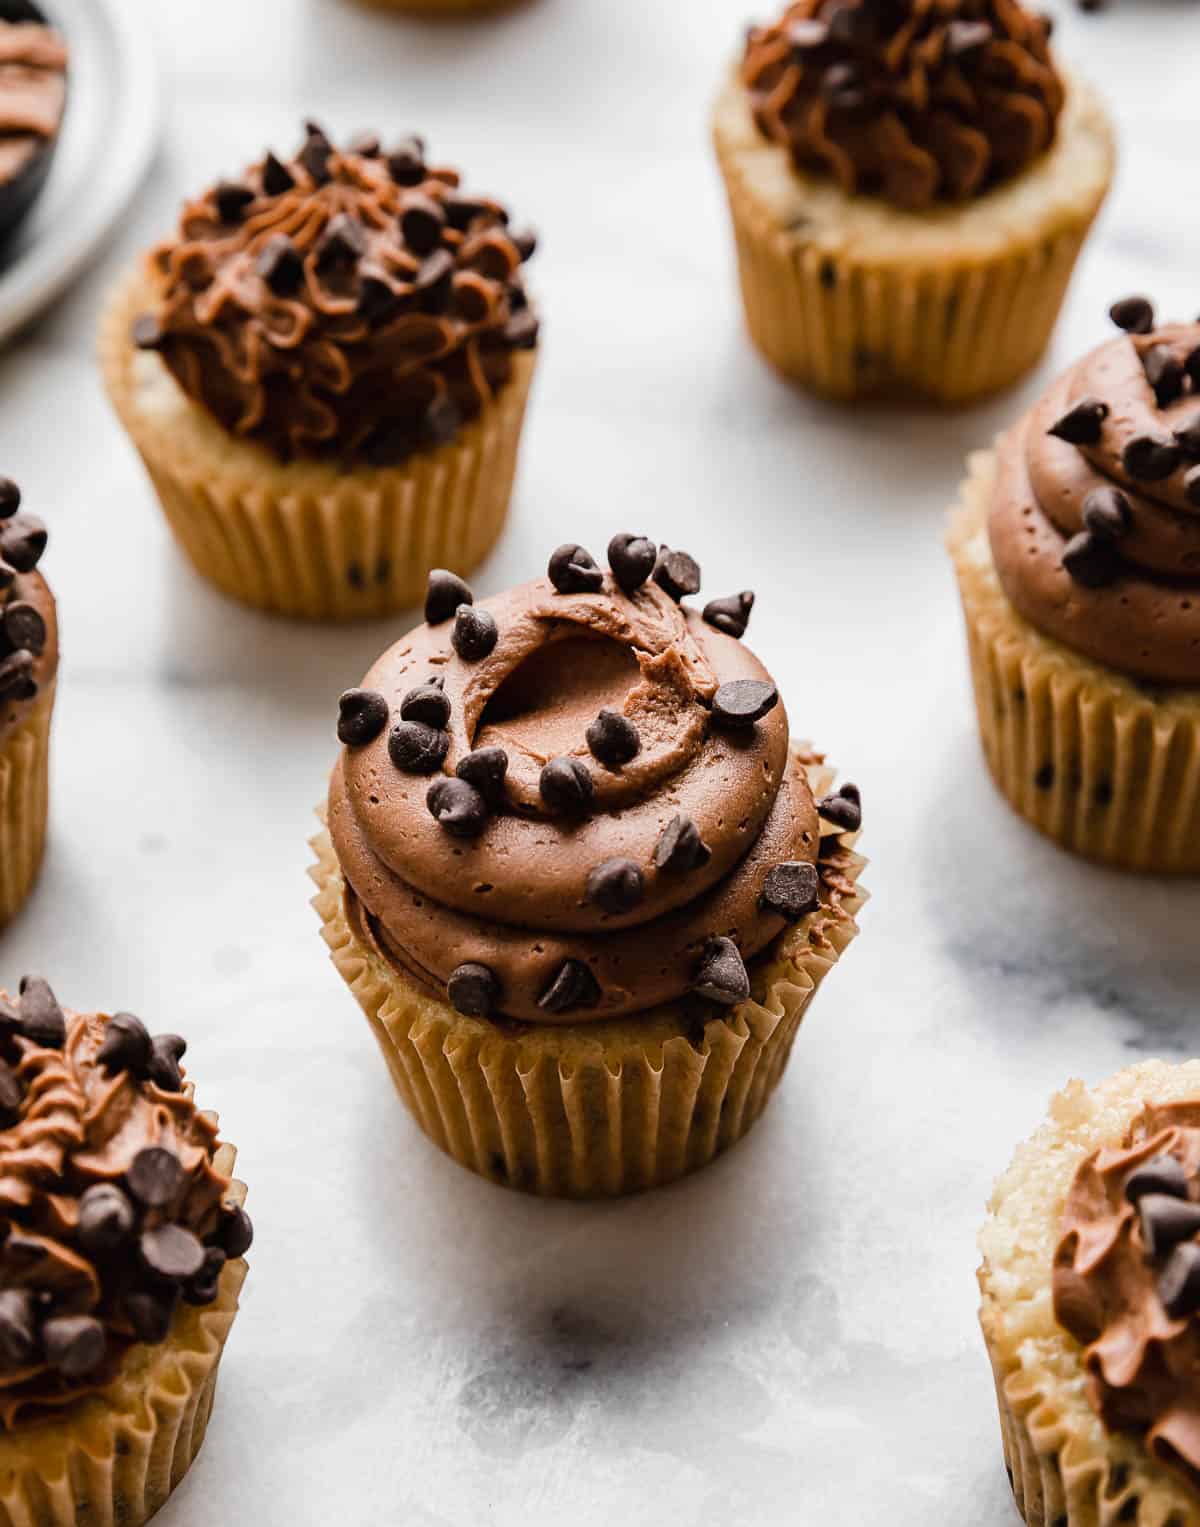 Mini chocolate chip topped Chocolate Chip Cupcakes with a swirl of chocolate buttercream frosting on top!